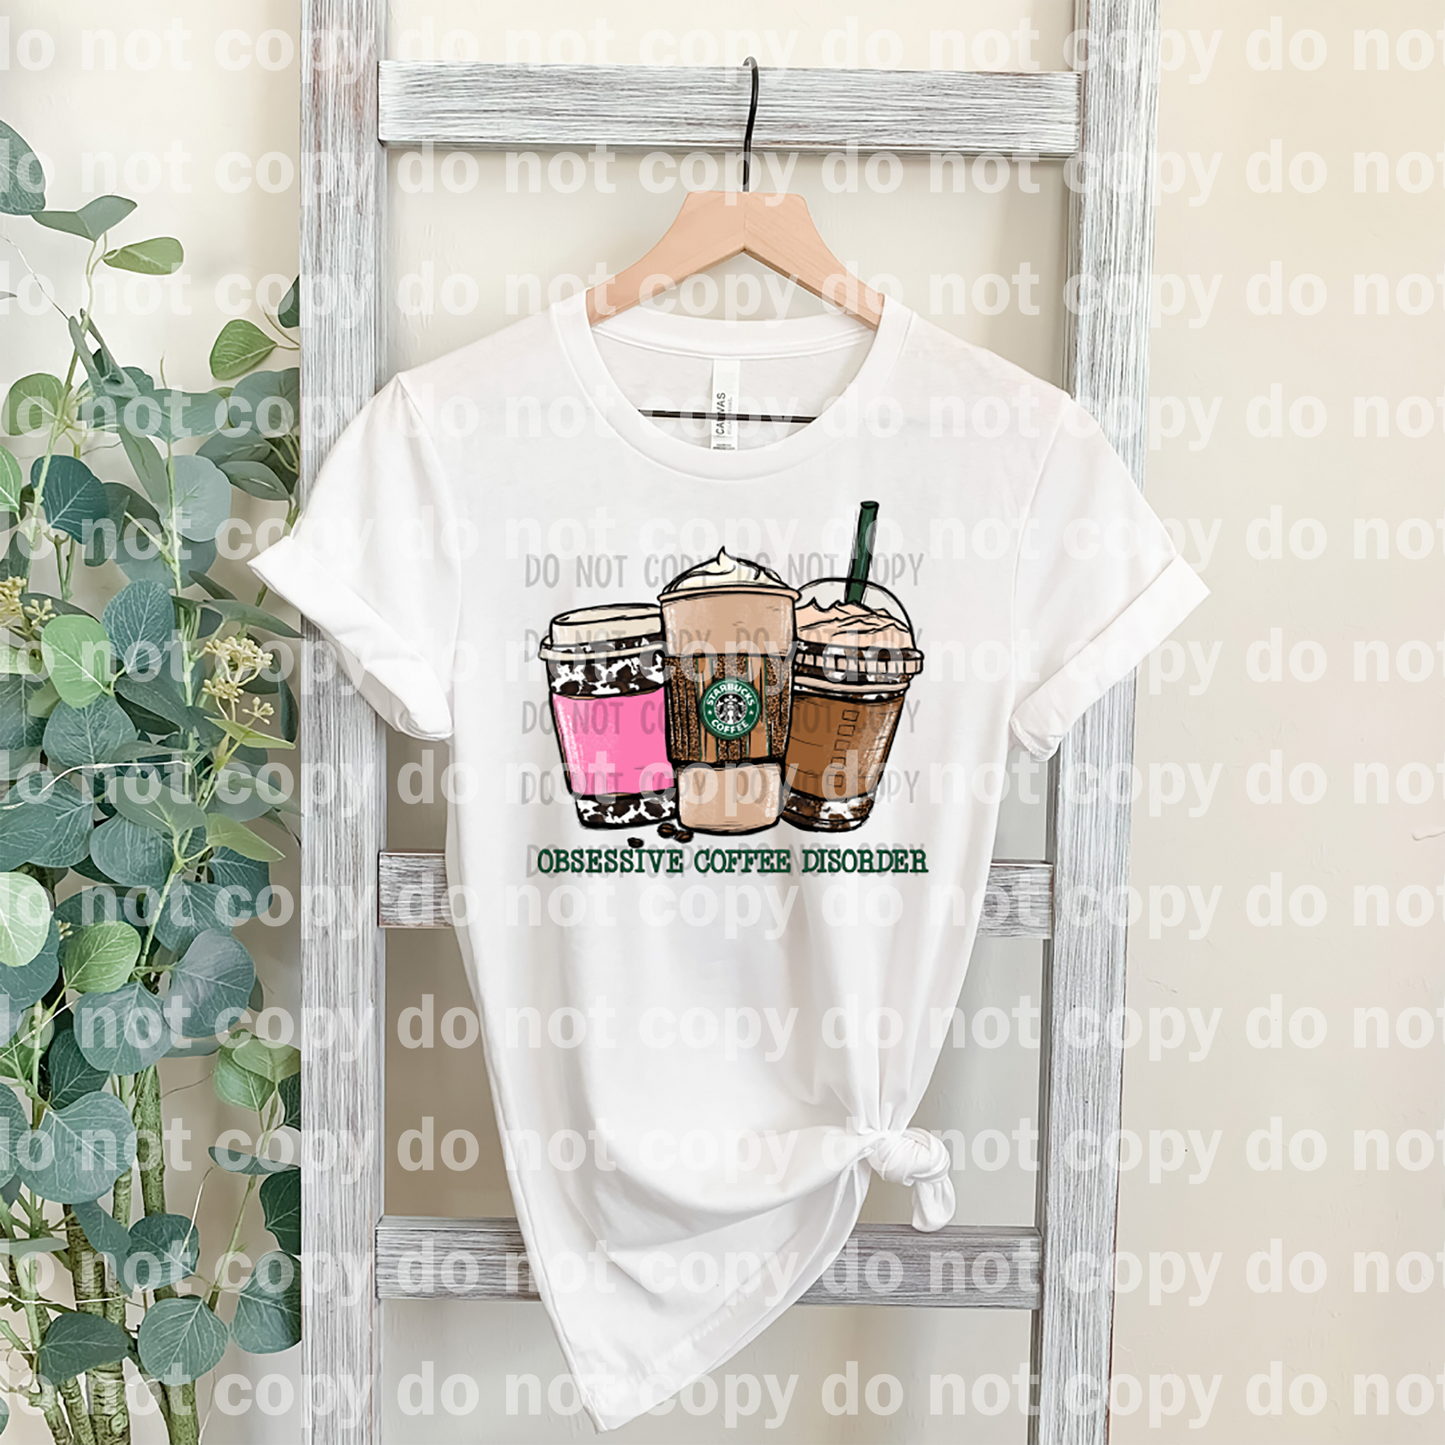 Obsessive Coffee Disorder Dream Print or Sublimation Print